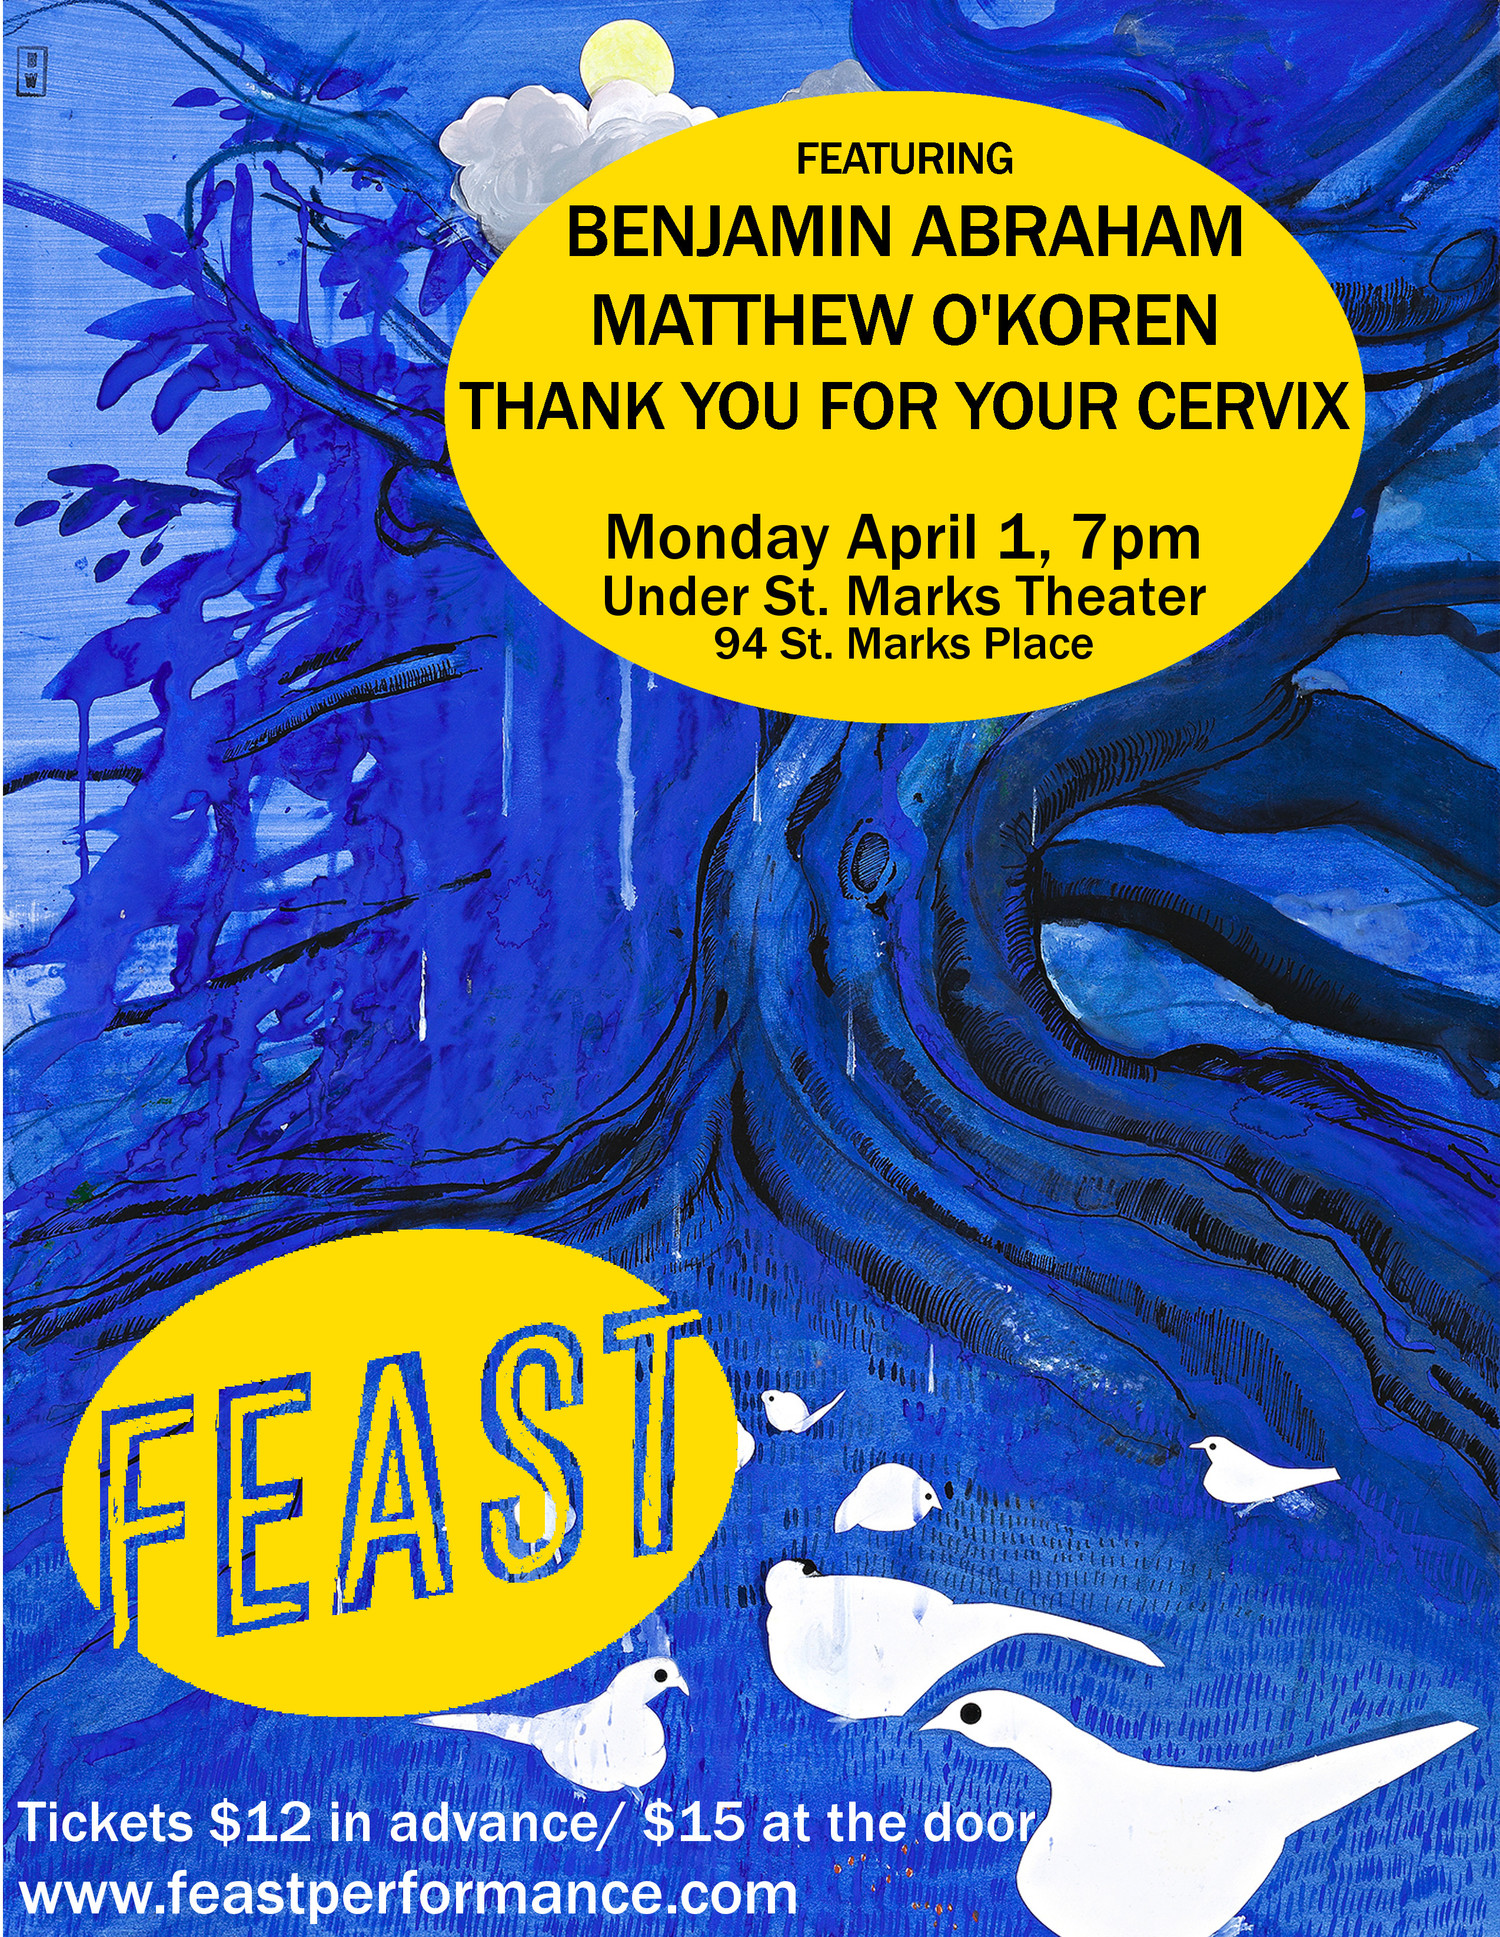 FEAST Returns to Under St. Marks Theater 